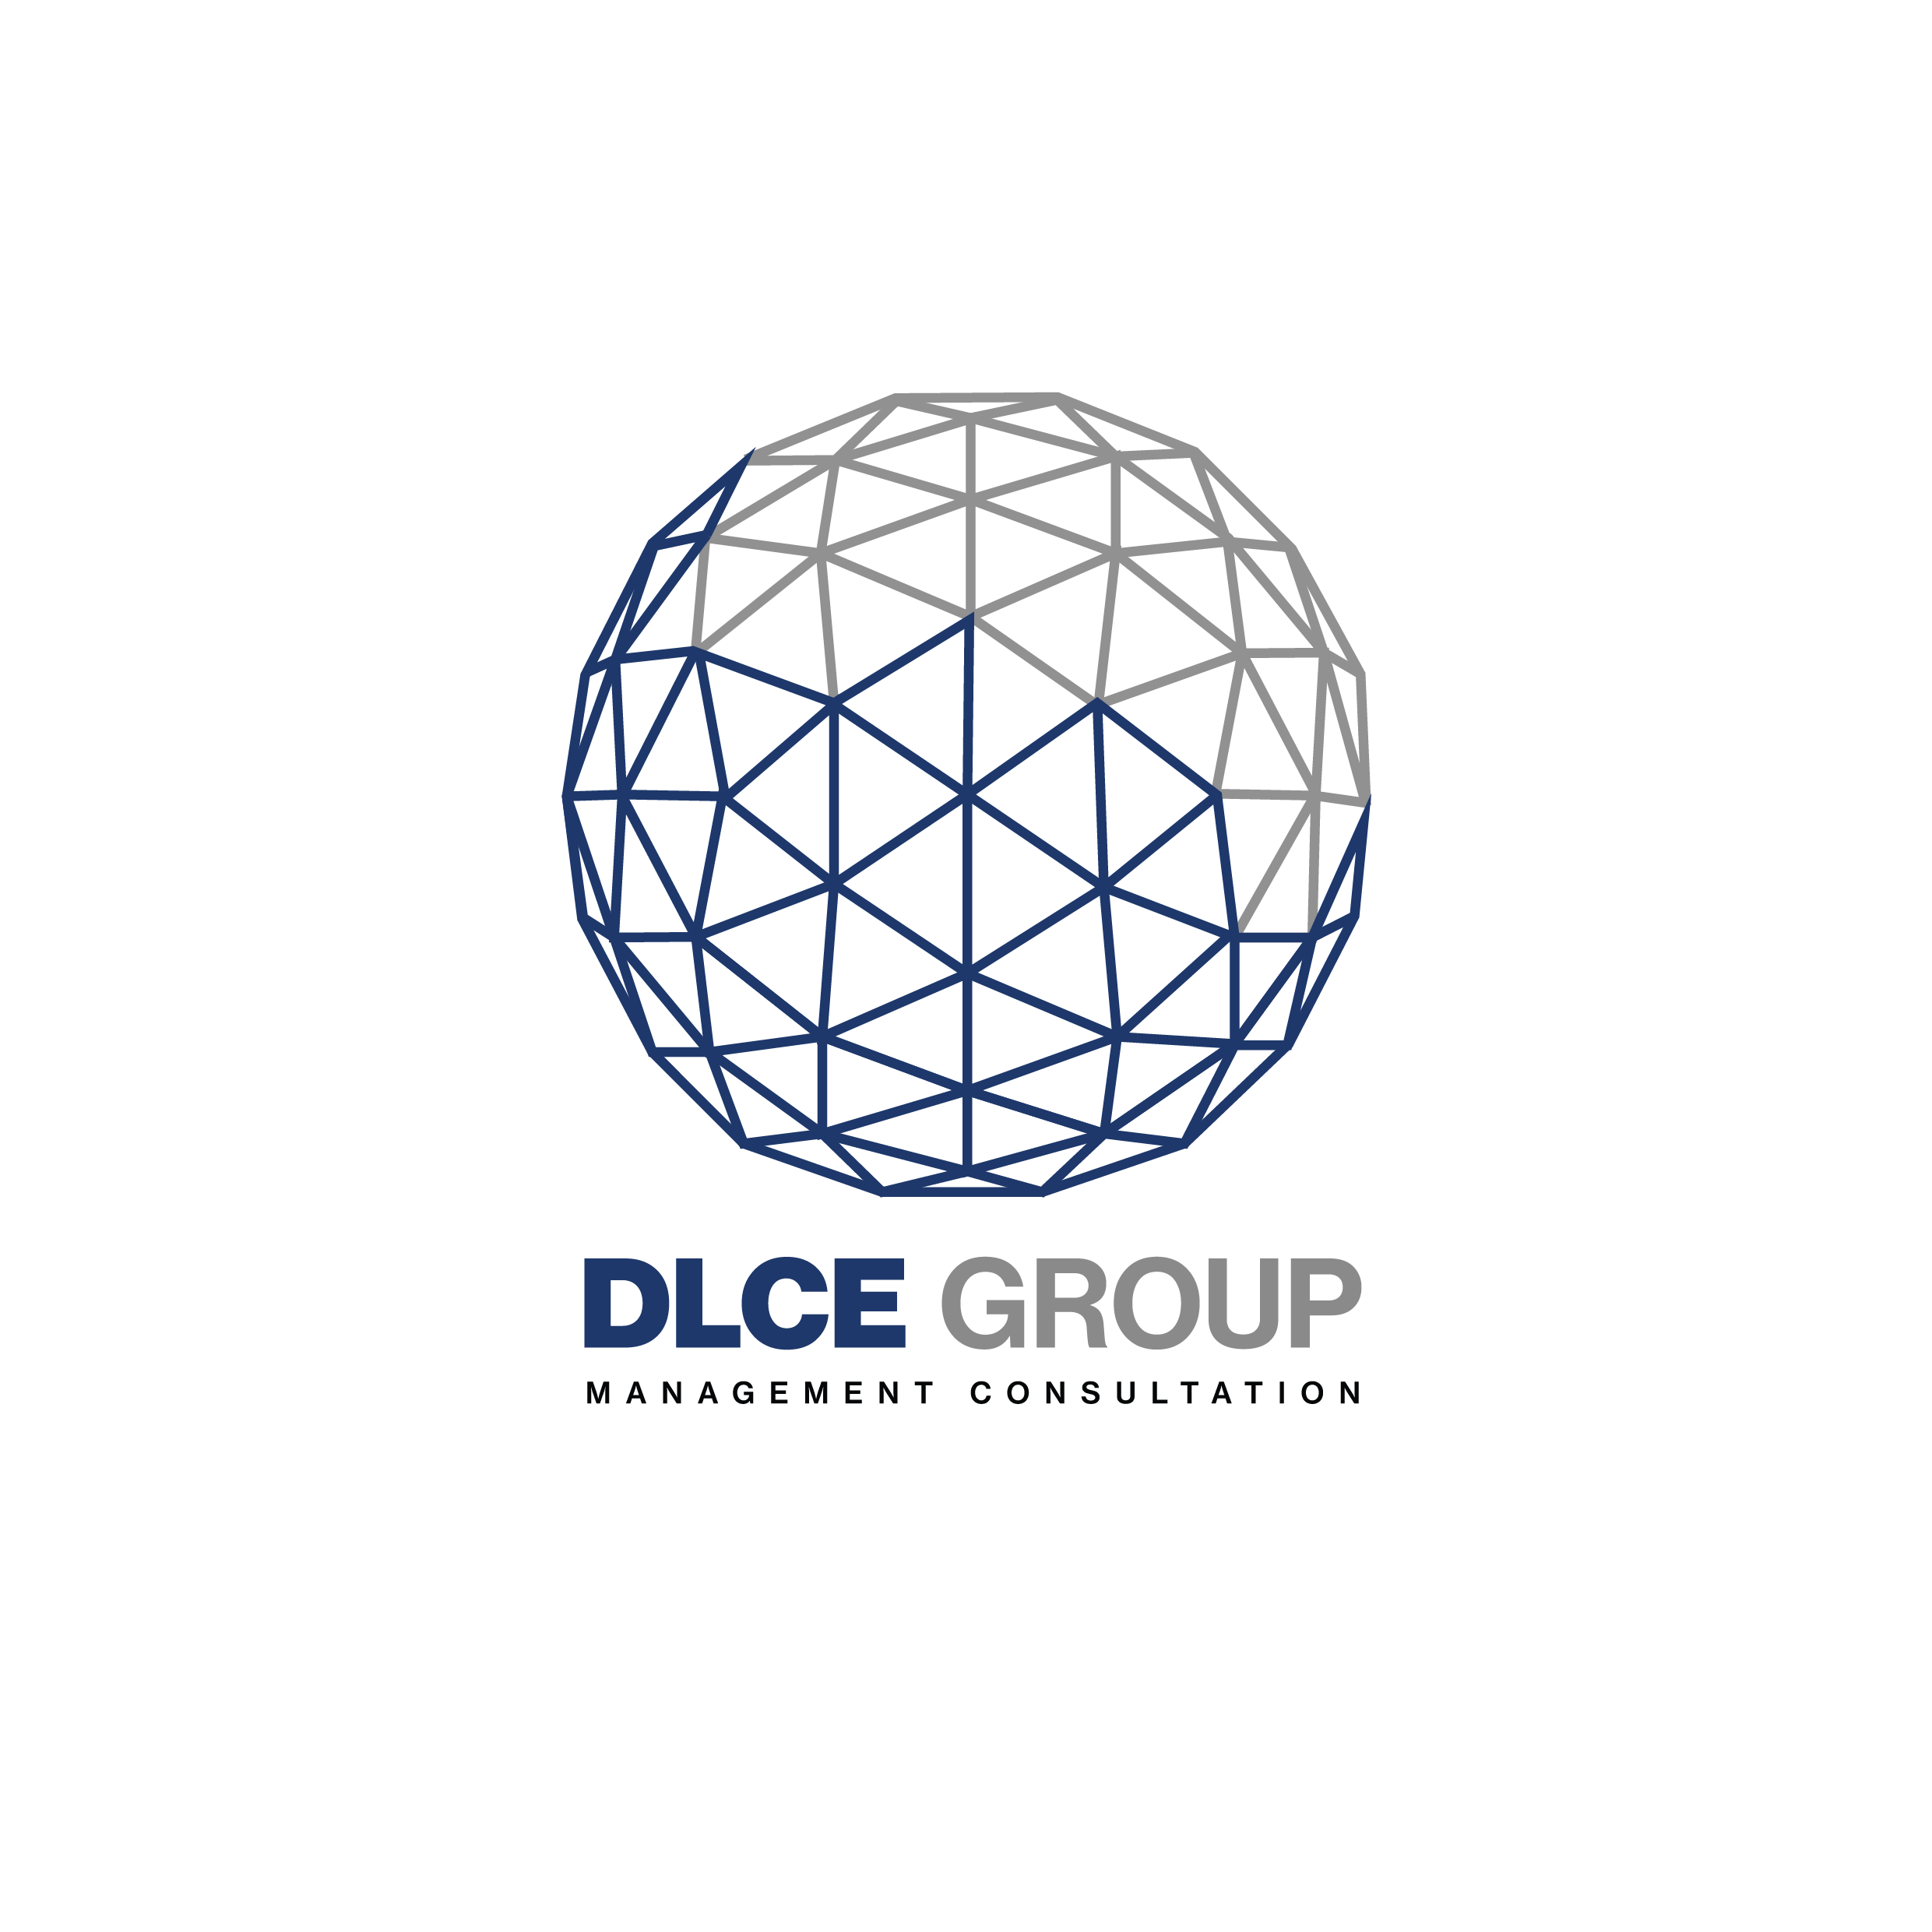 DLCE GROUP